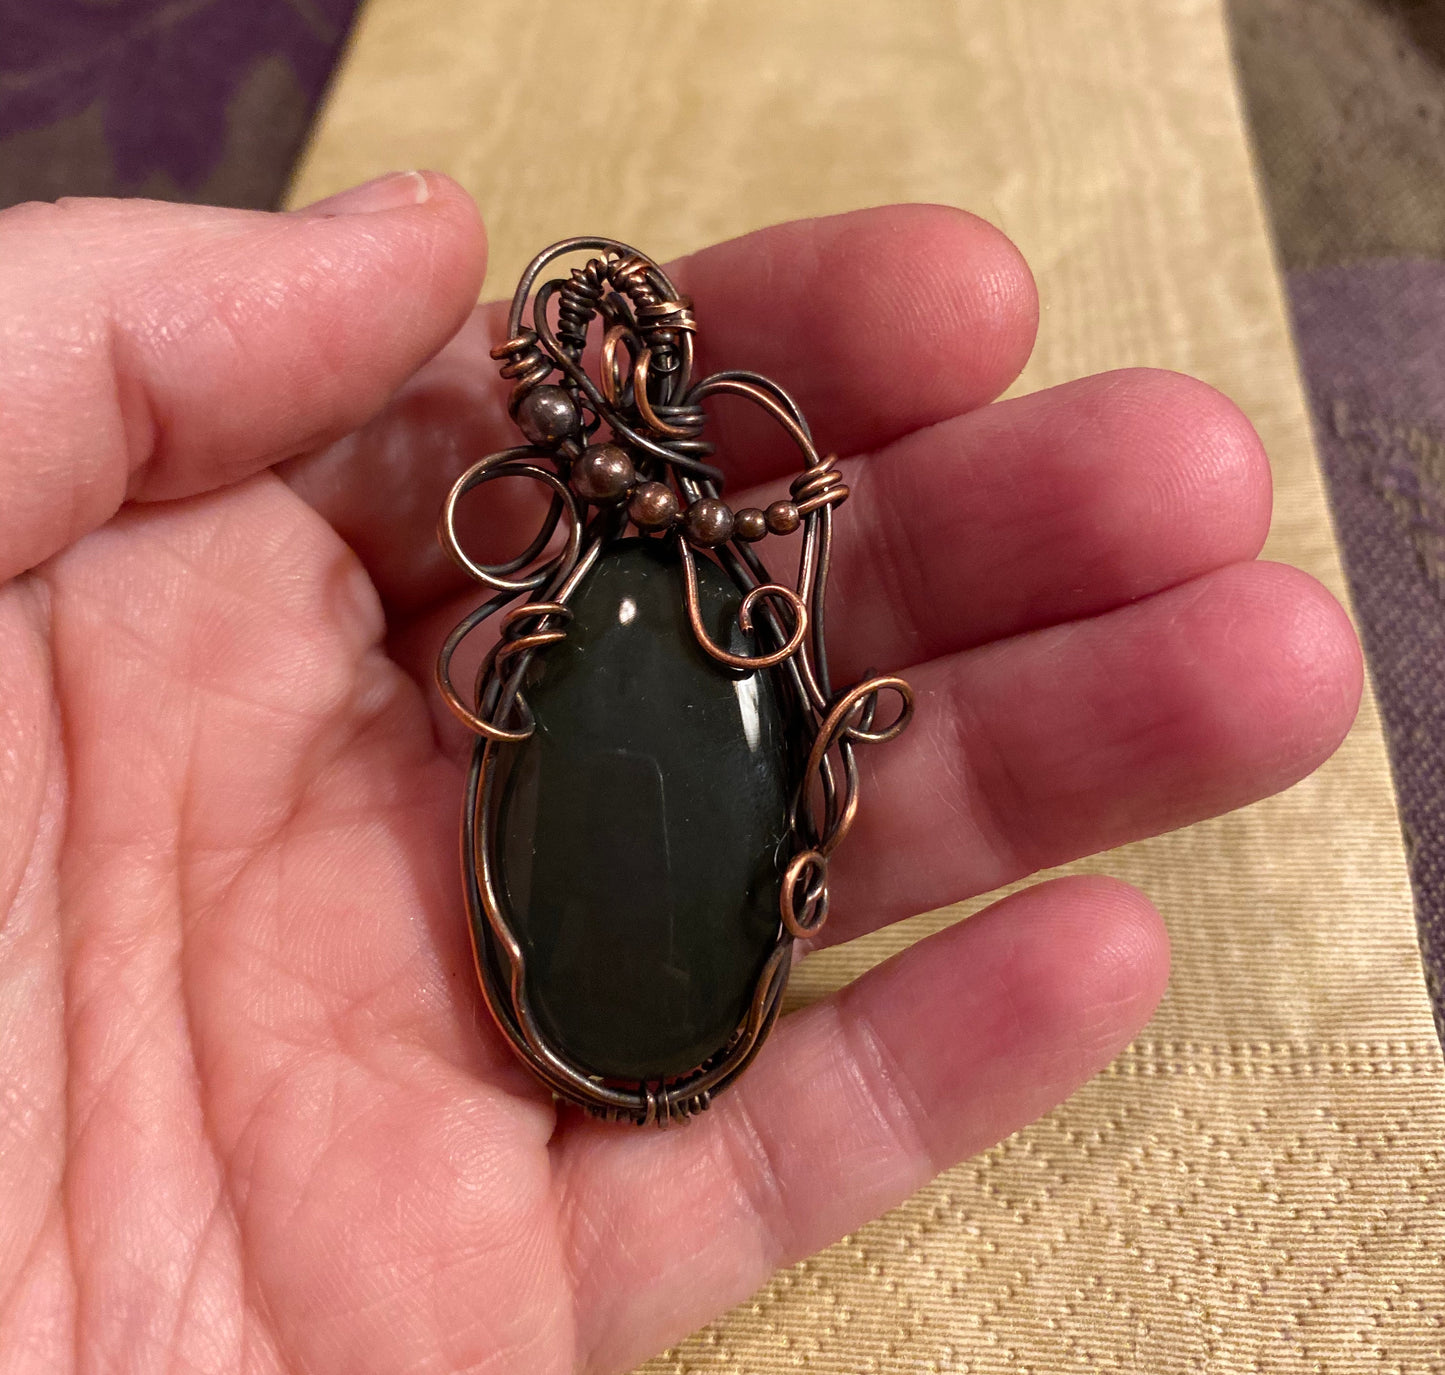 Gray Agate Oval Pendant With Copper Beads And Wire Wrapped Swirls